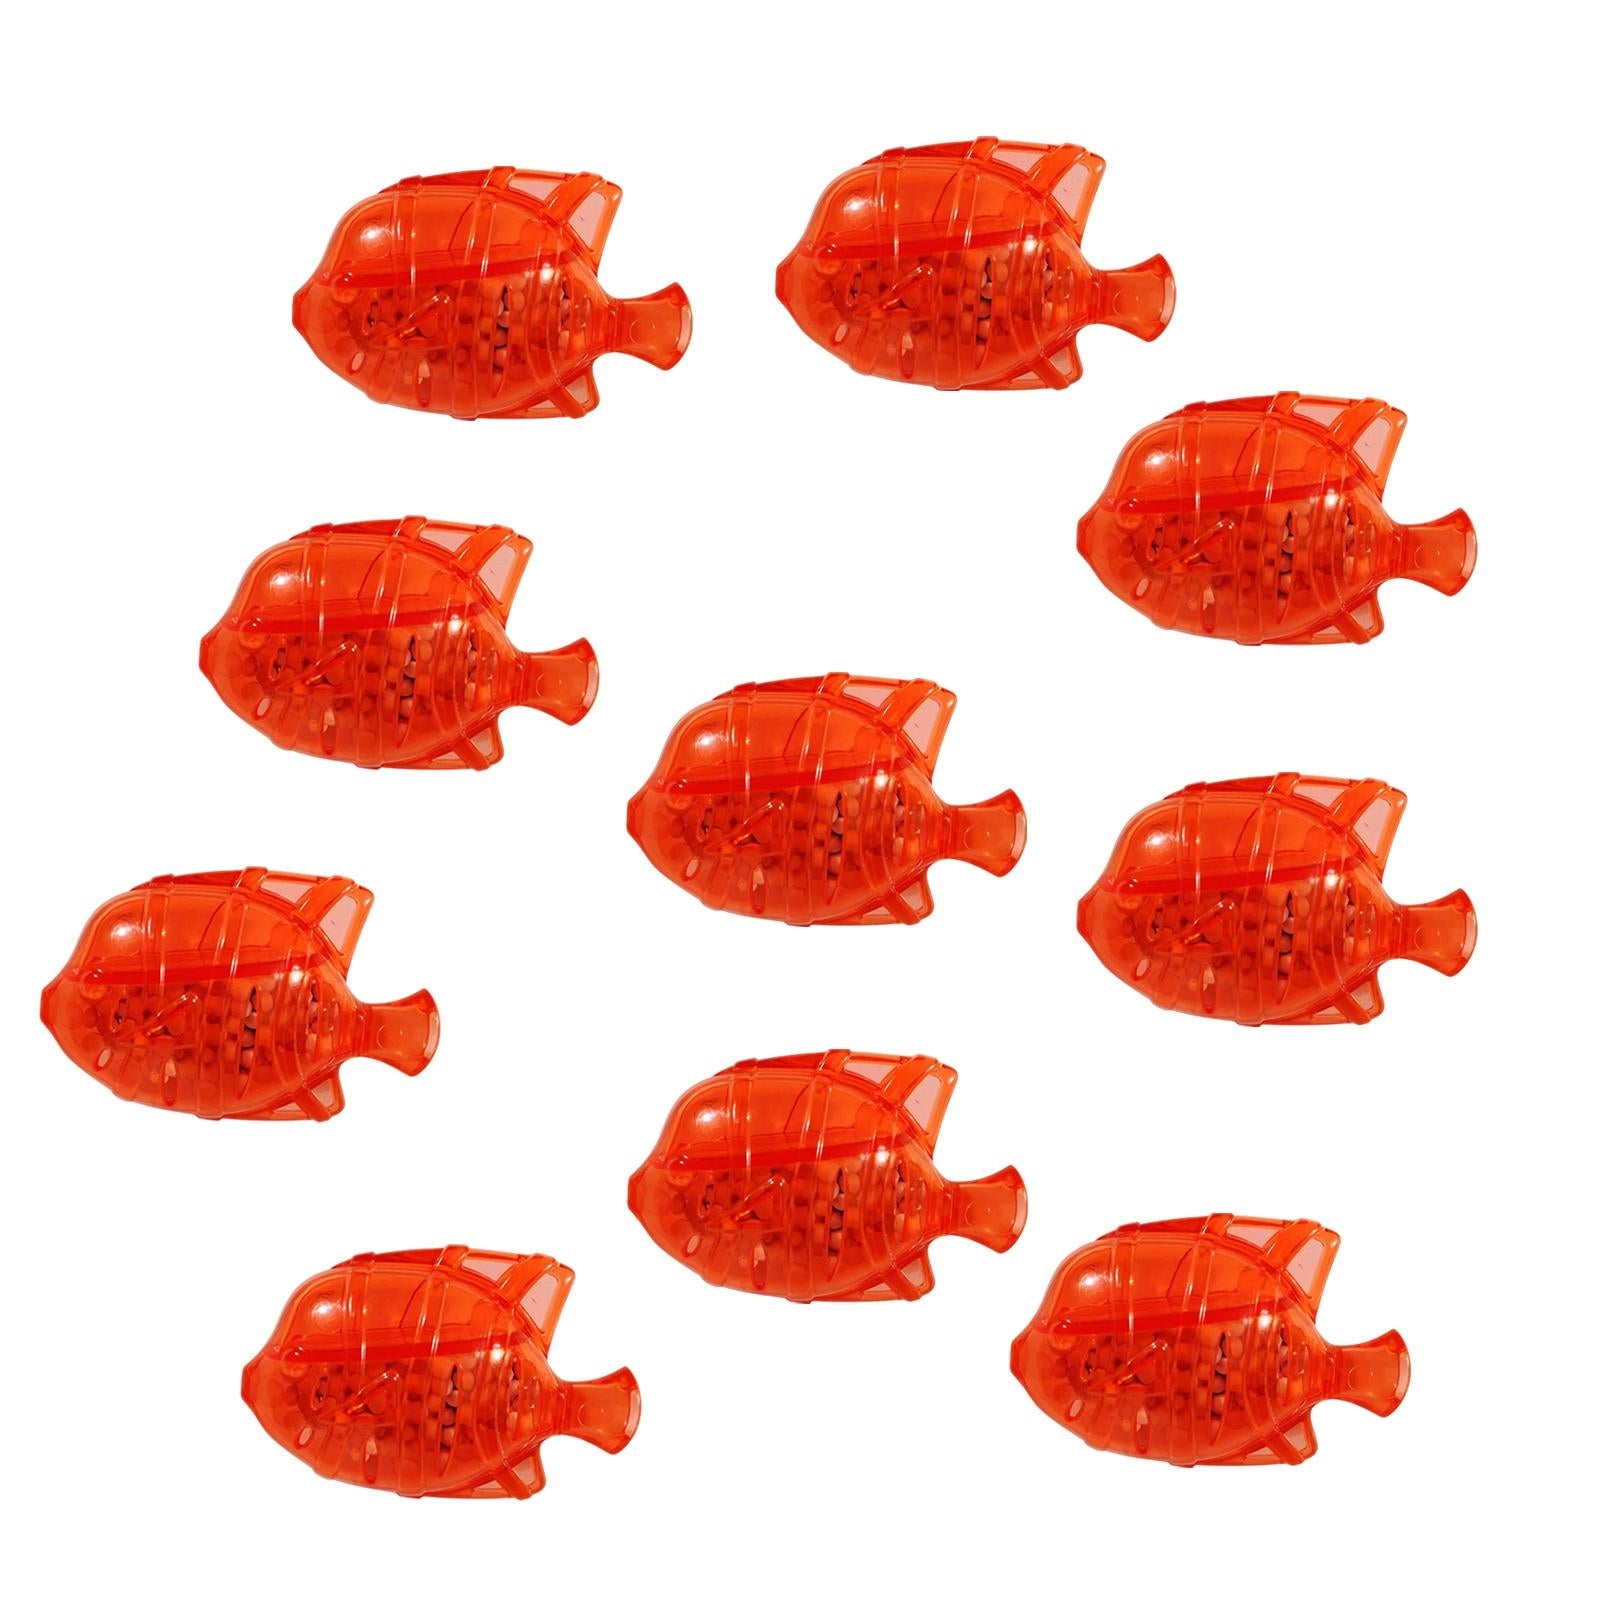 10pcs Humidifier Cleaner Warm/Cool Mist Fish Tank Fresher Fishes Red